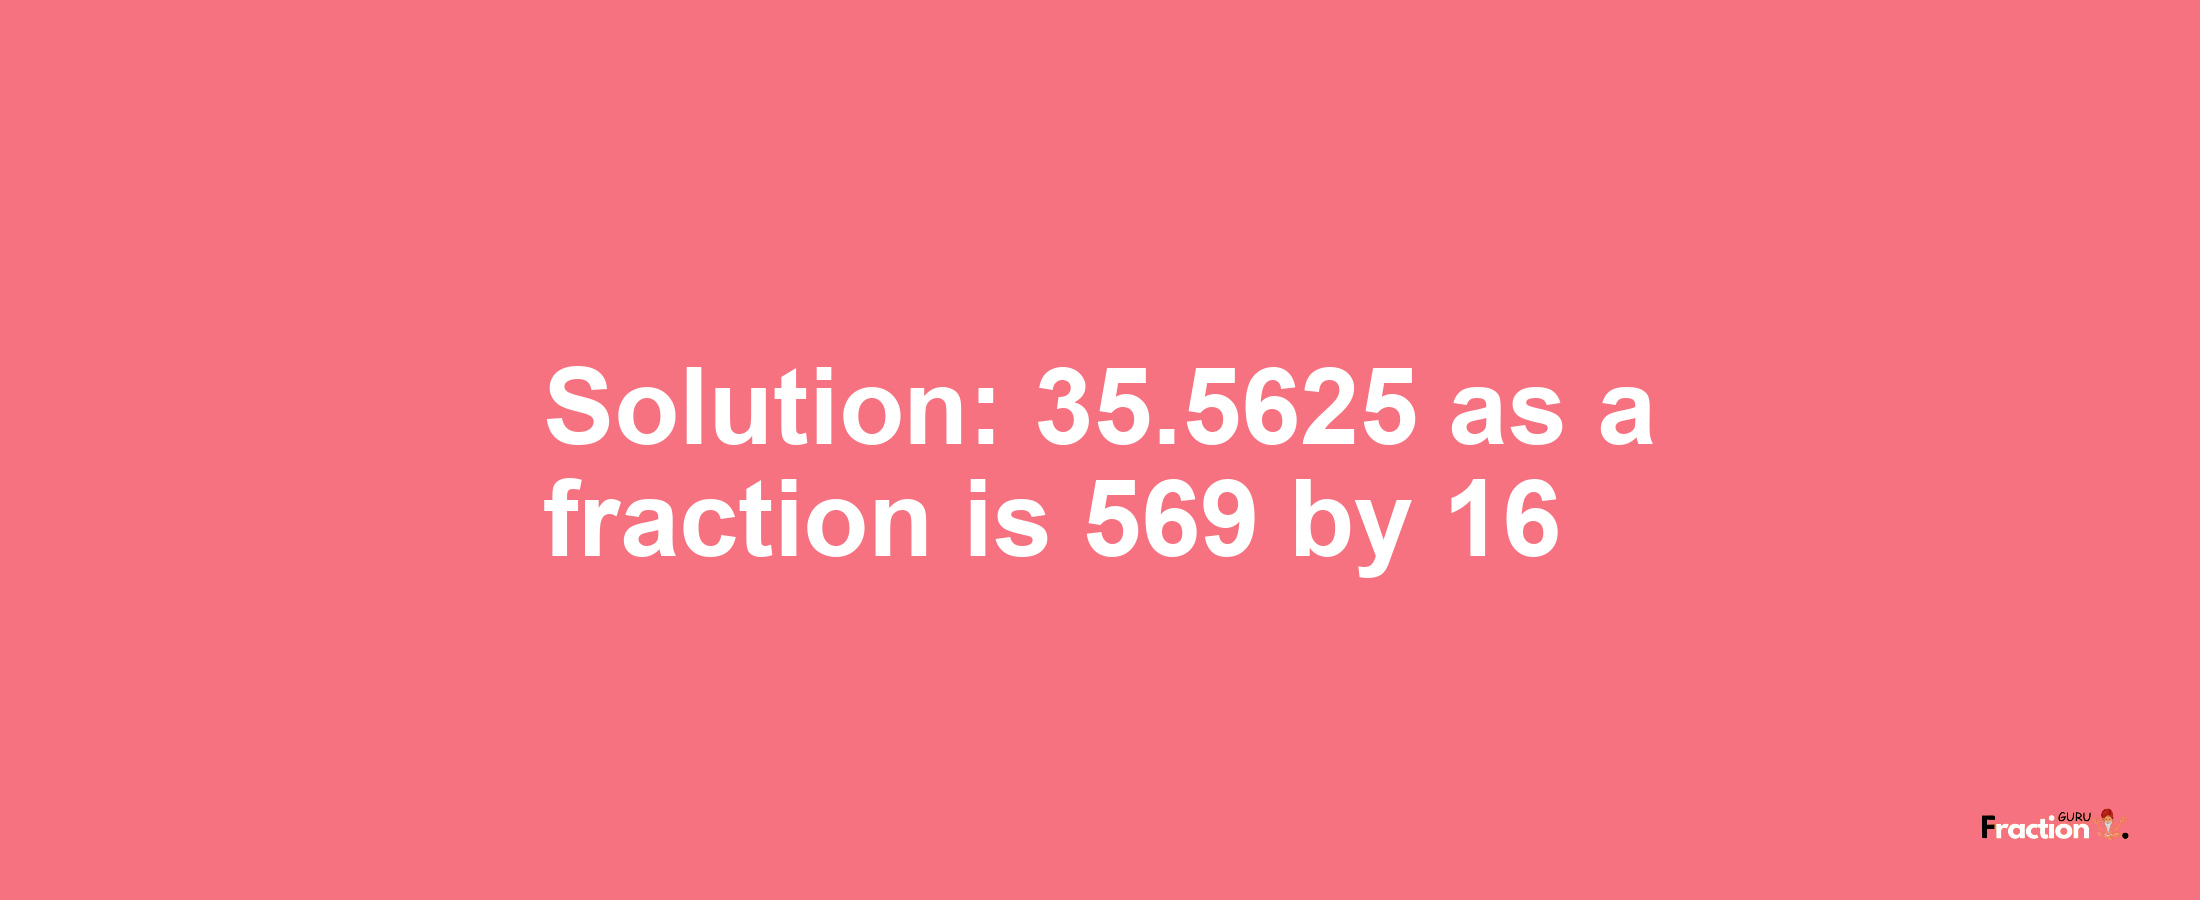 Solution:35.5625 as a fraction is 569/16